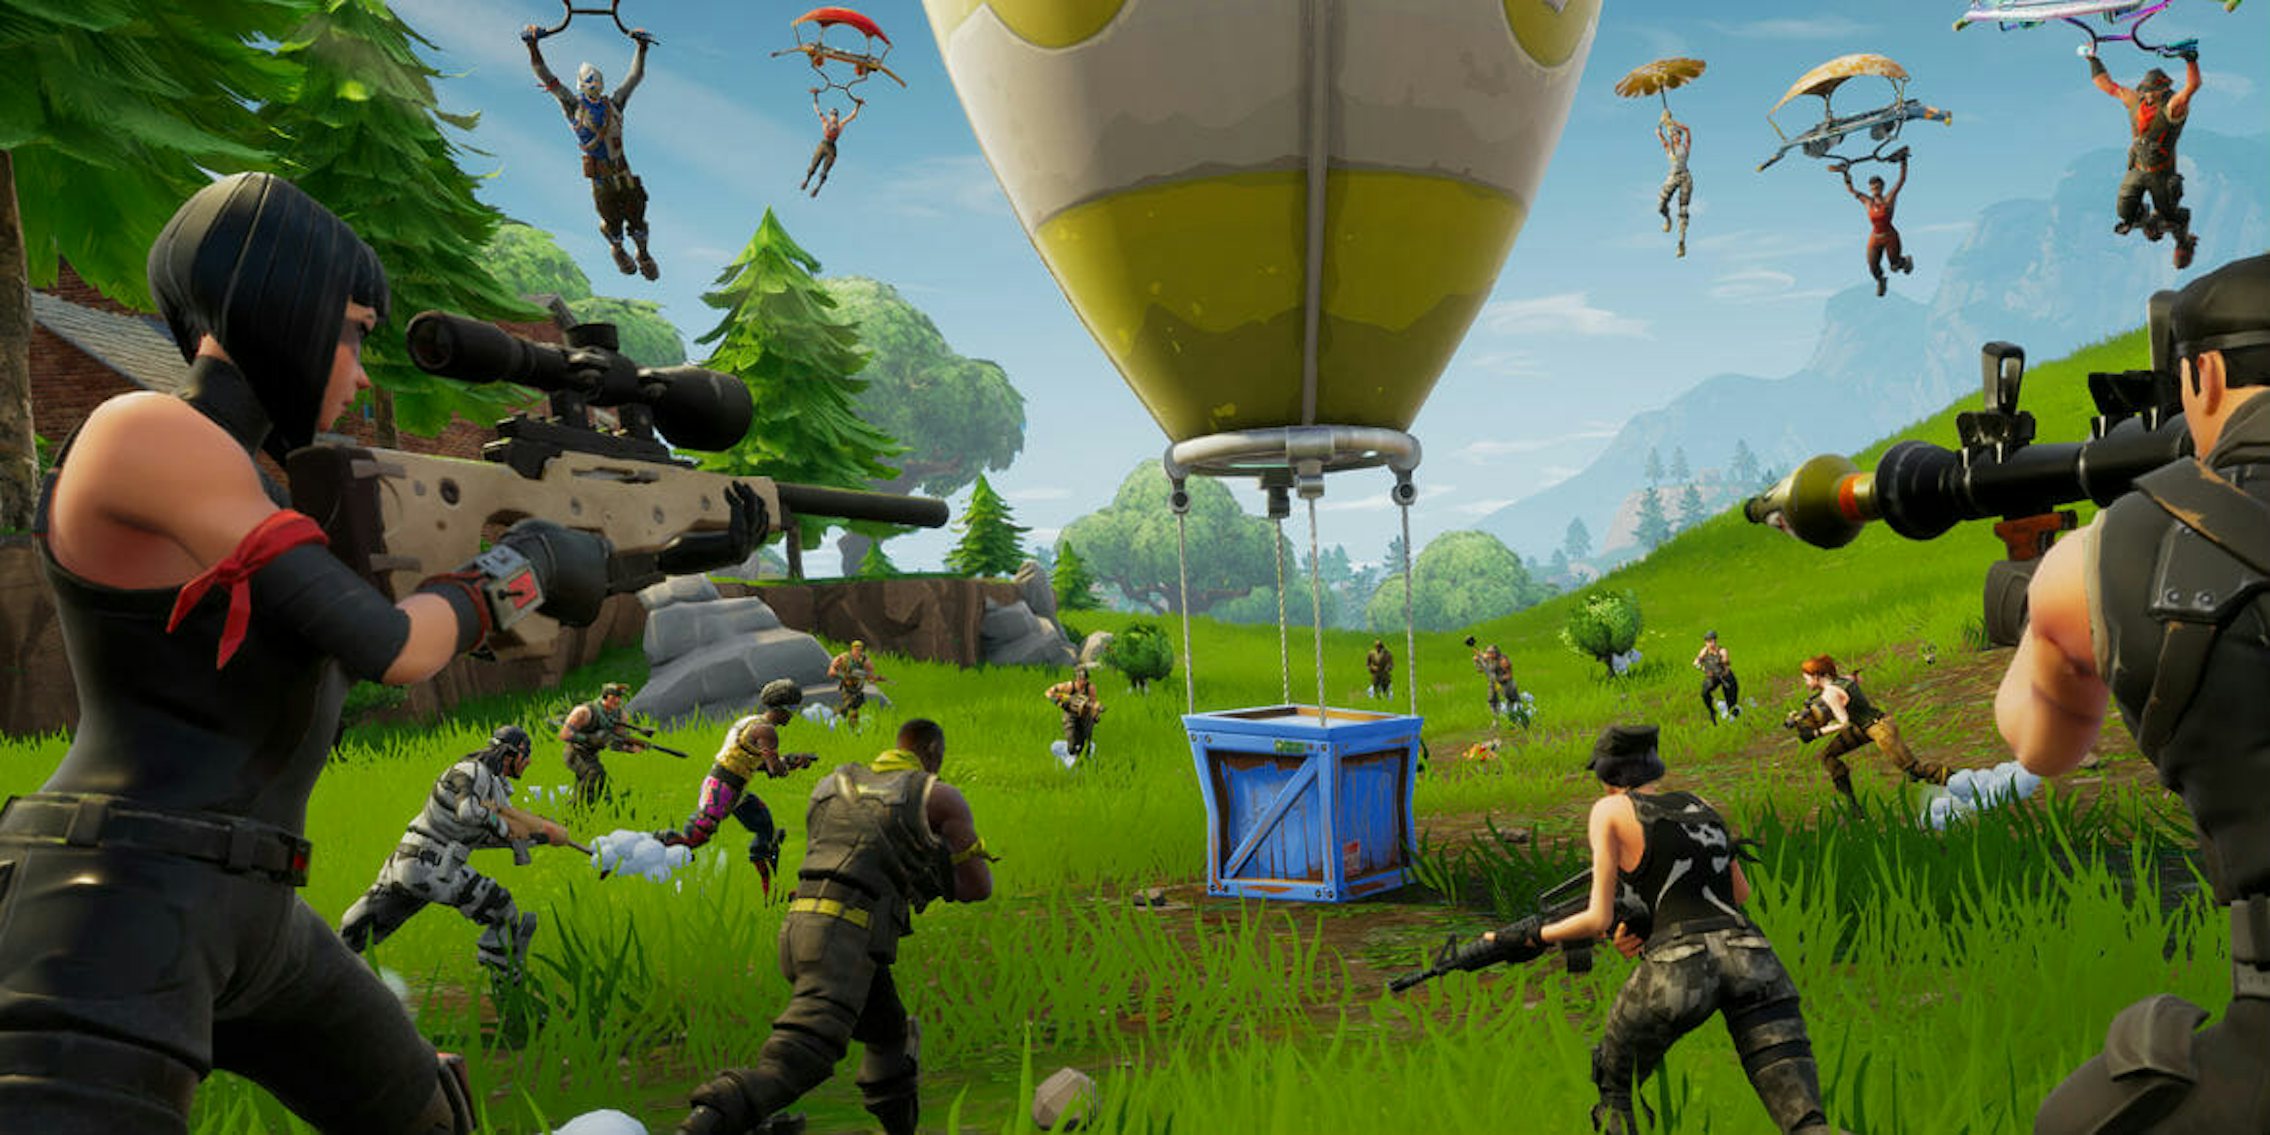 When is Fortnite Android going to be released, will it be on Google Play  and does it have crossplay with PS4, Switch or Xbox One?